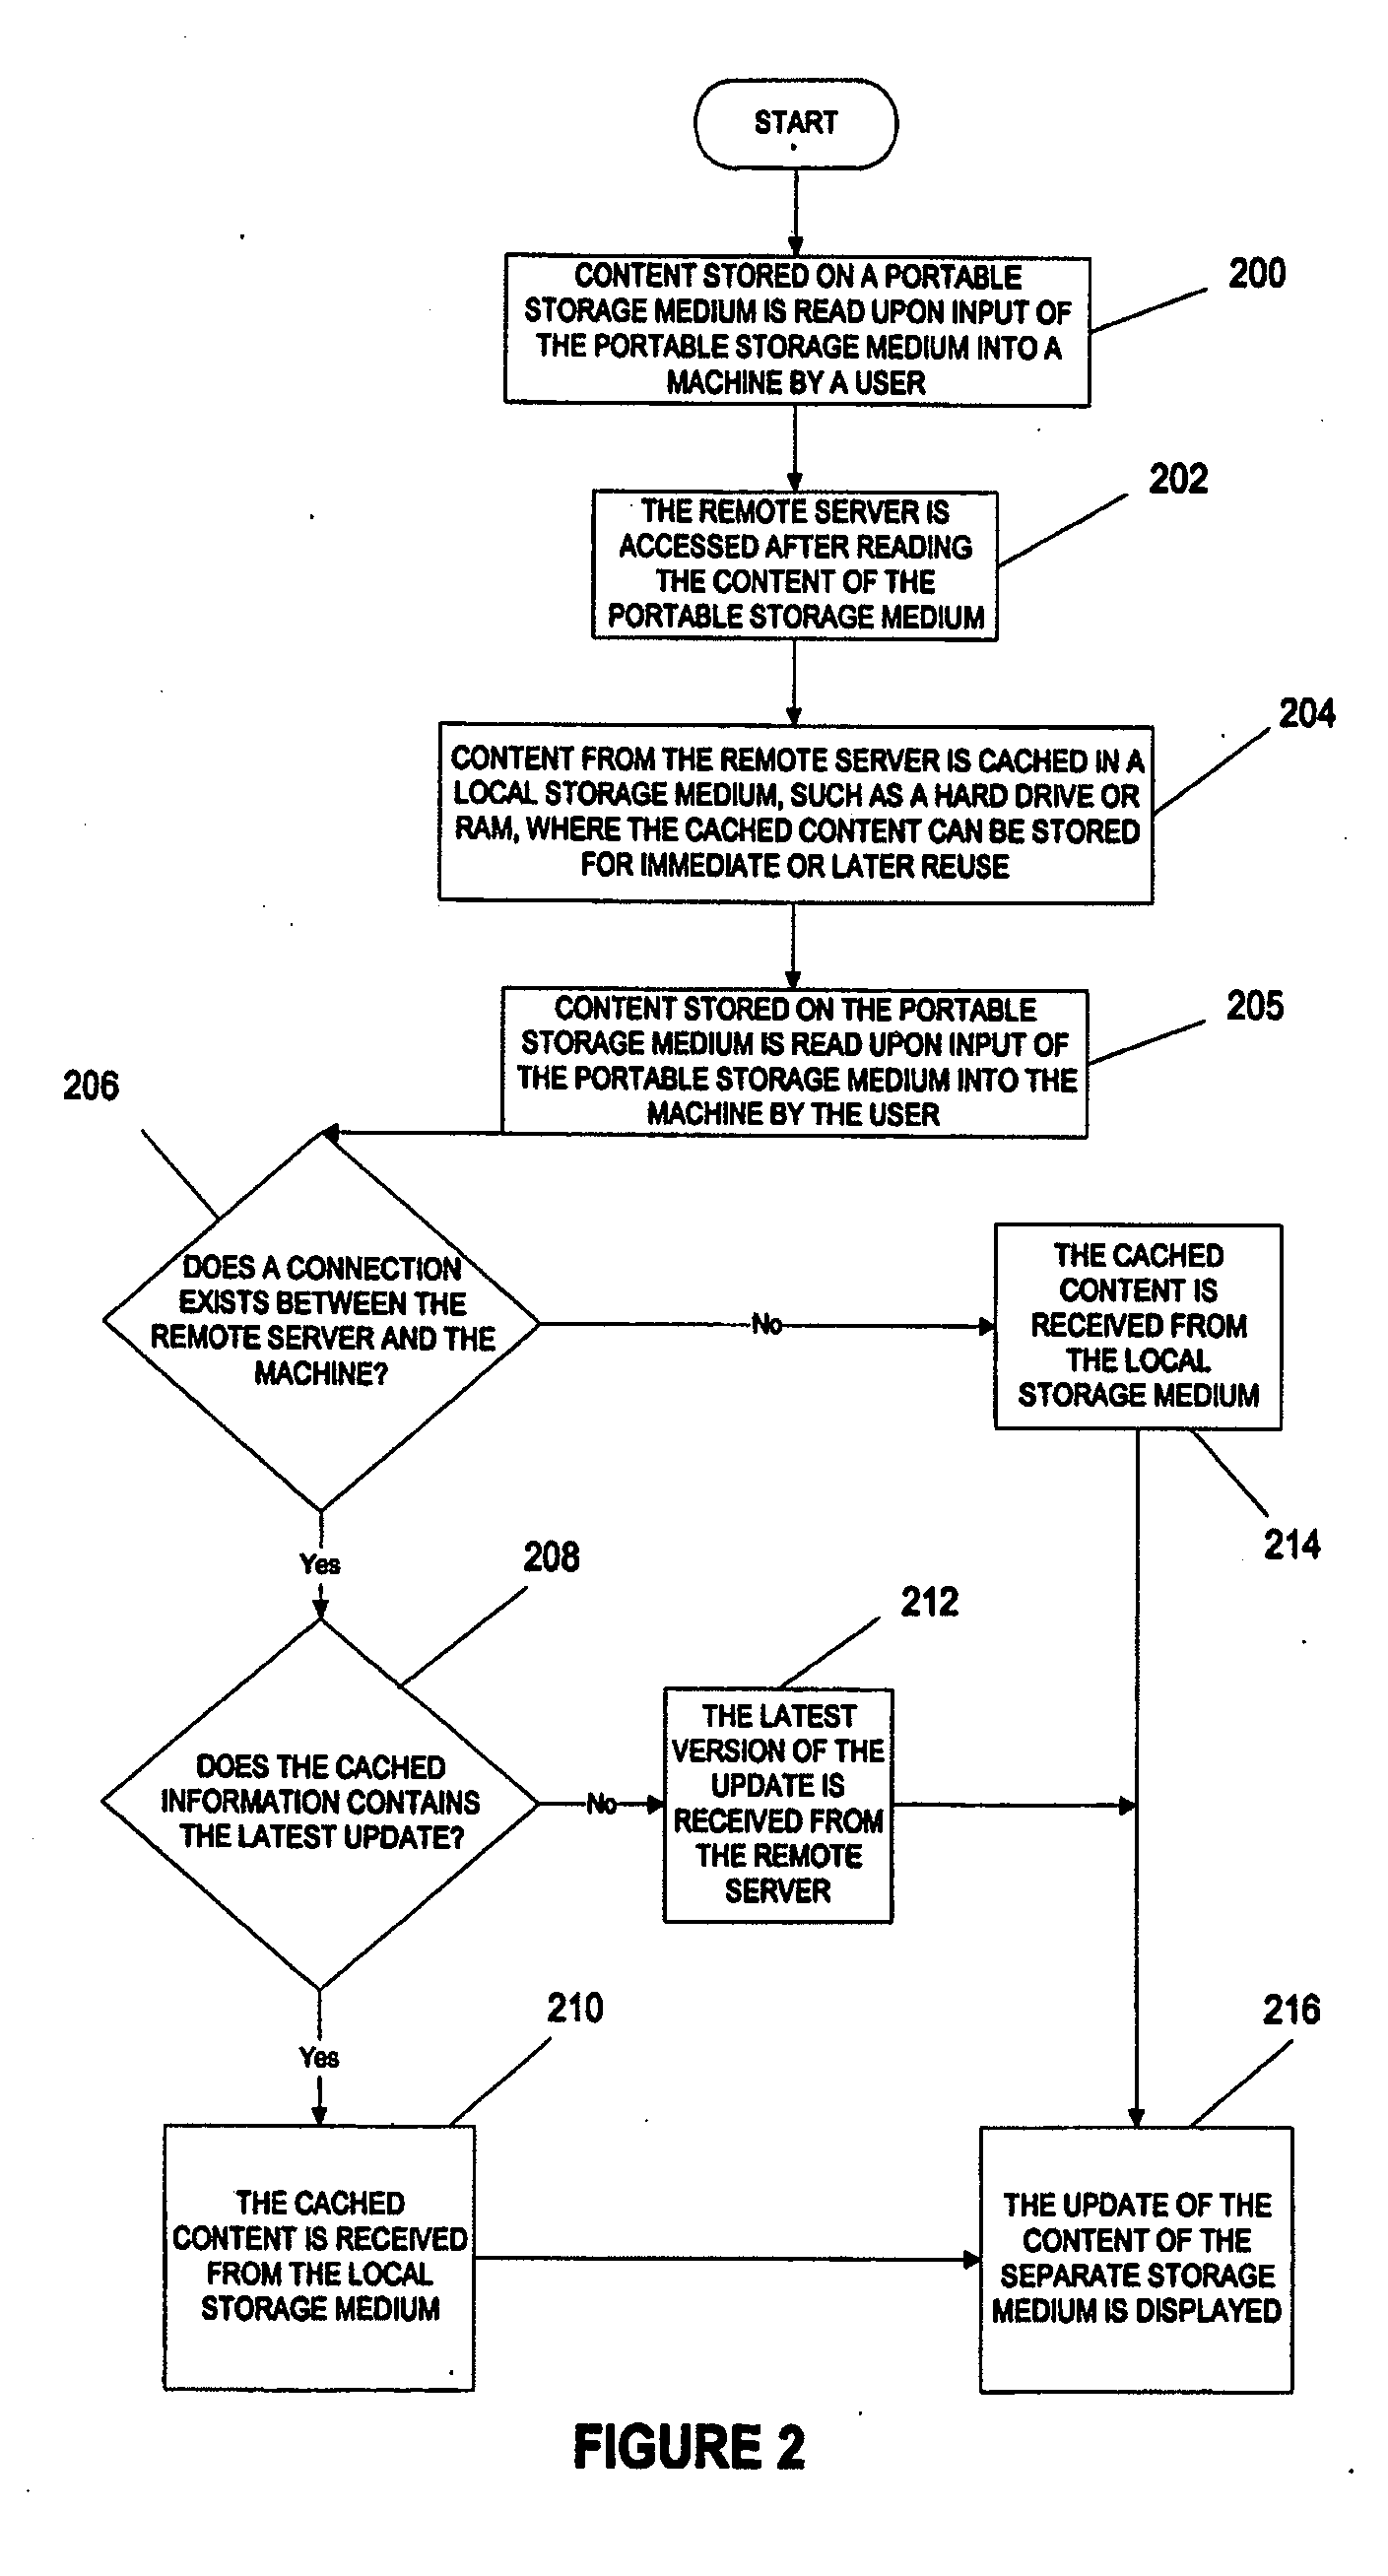 System, method and article of manufacture for updating content stored on a portable storage medium